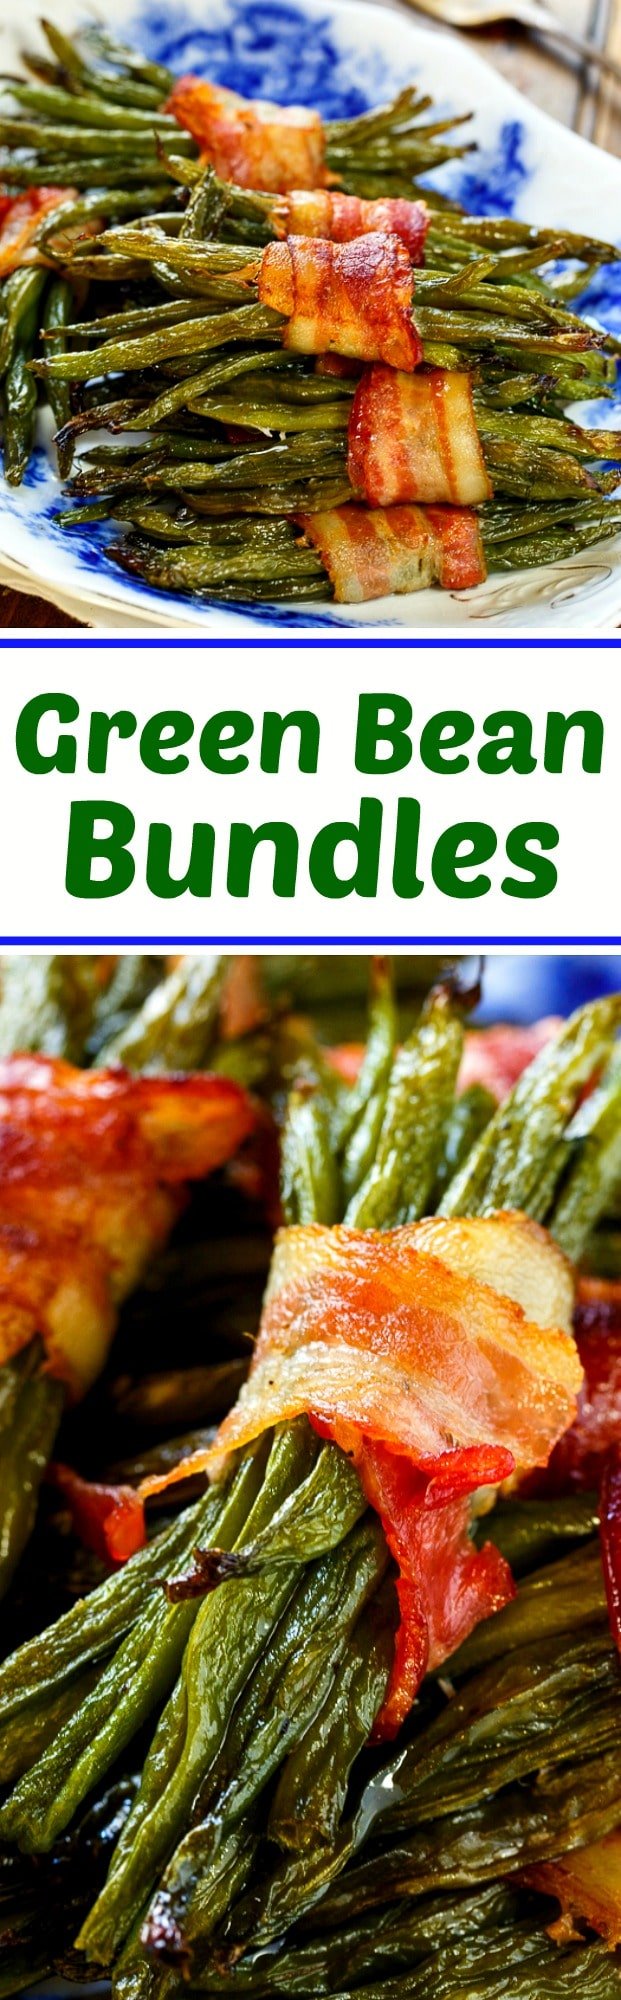 Green Bean Bundles wrapped in bacon- great for the holidays!